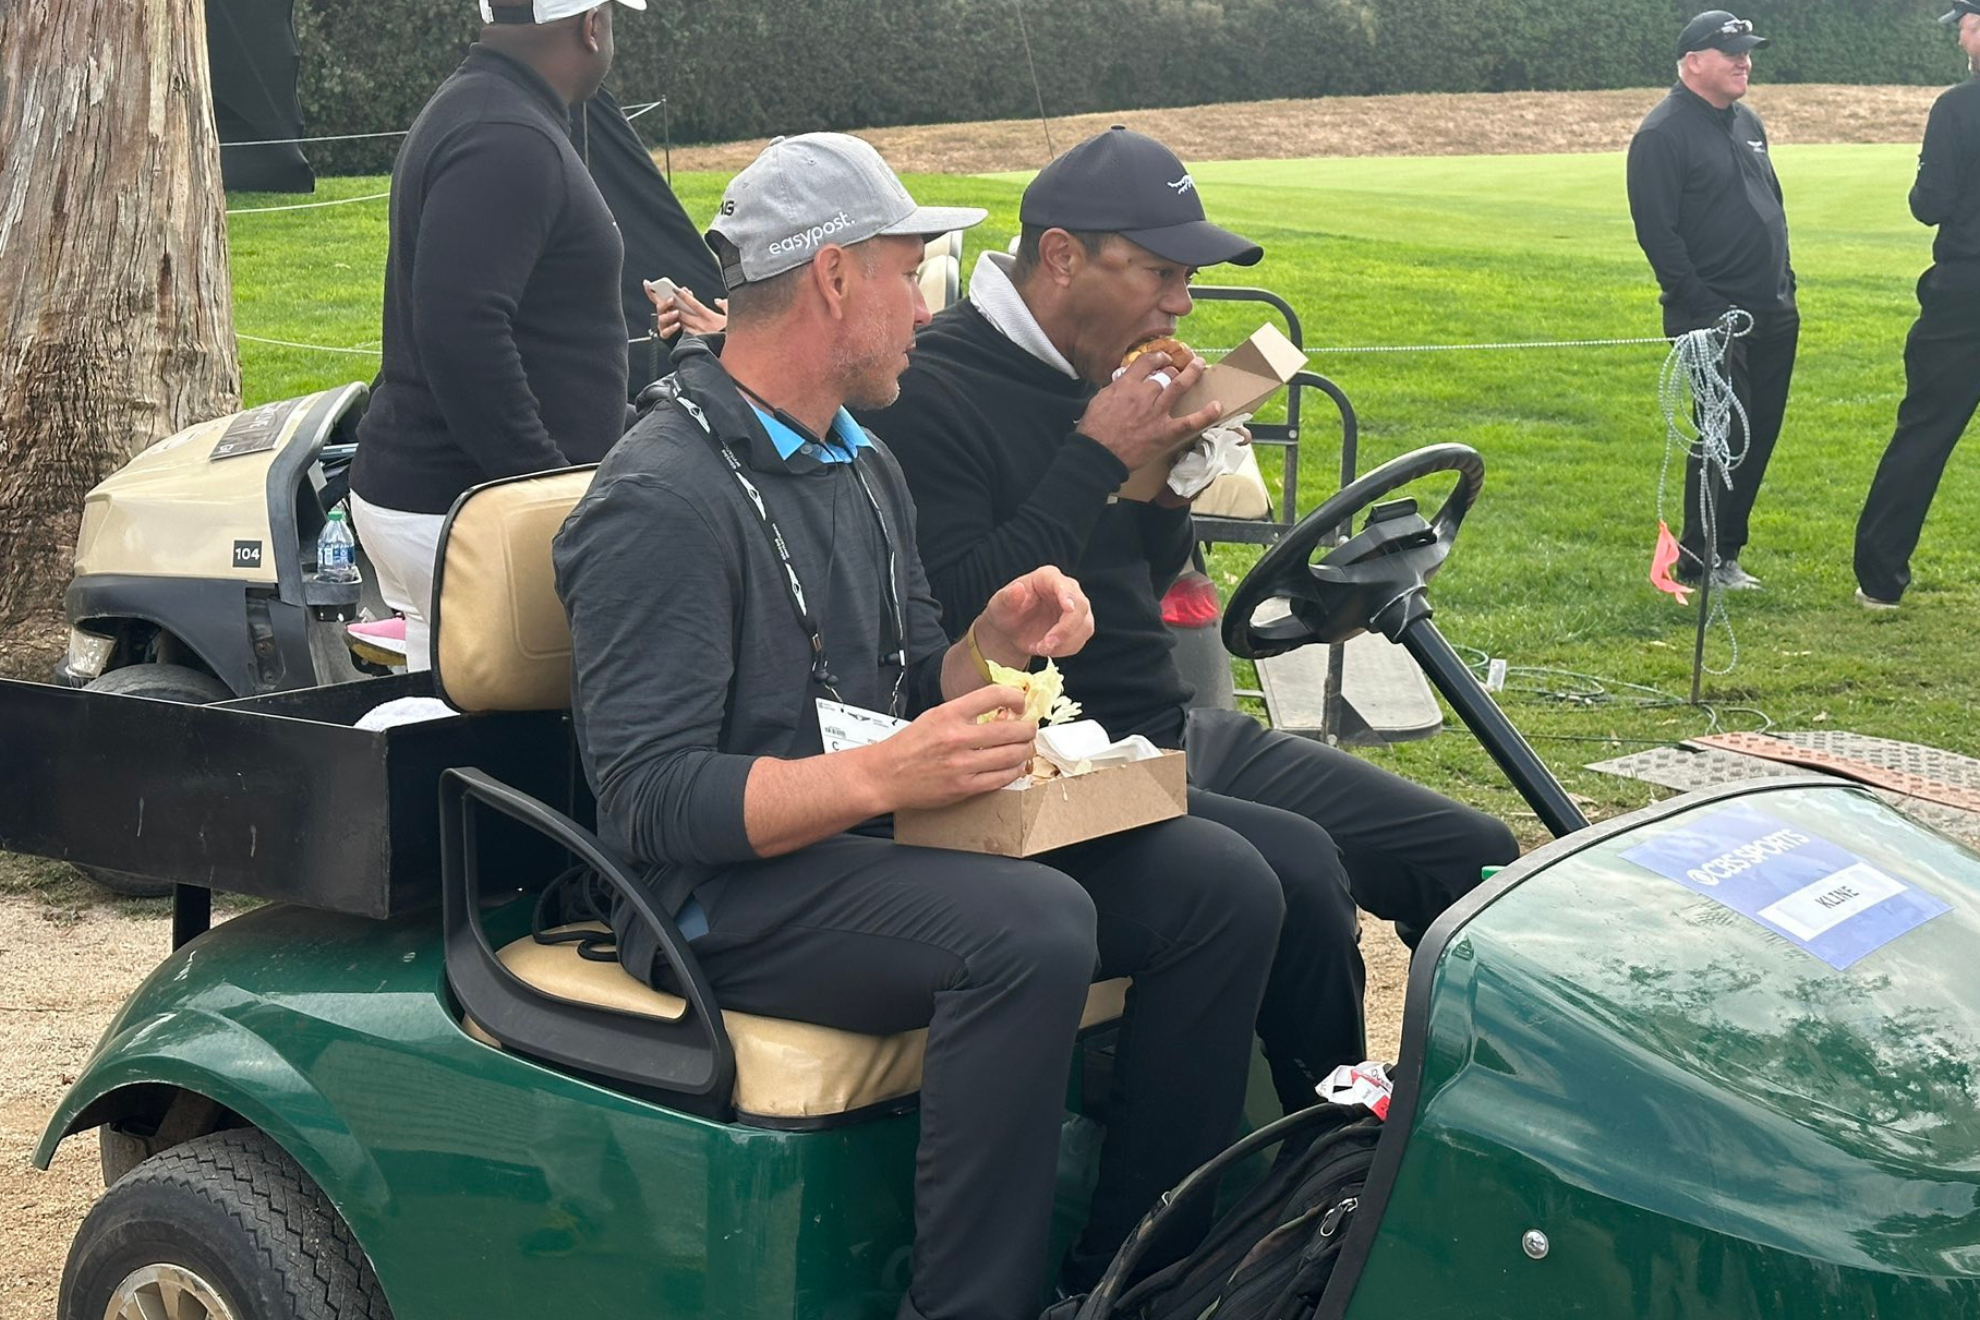 Tiger Woods consuming an In-N-Out burger.